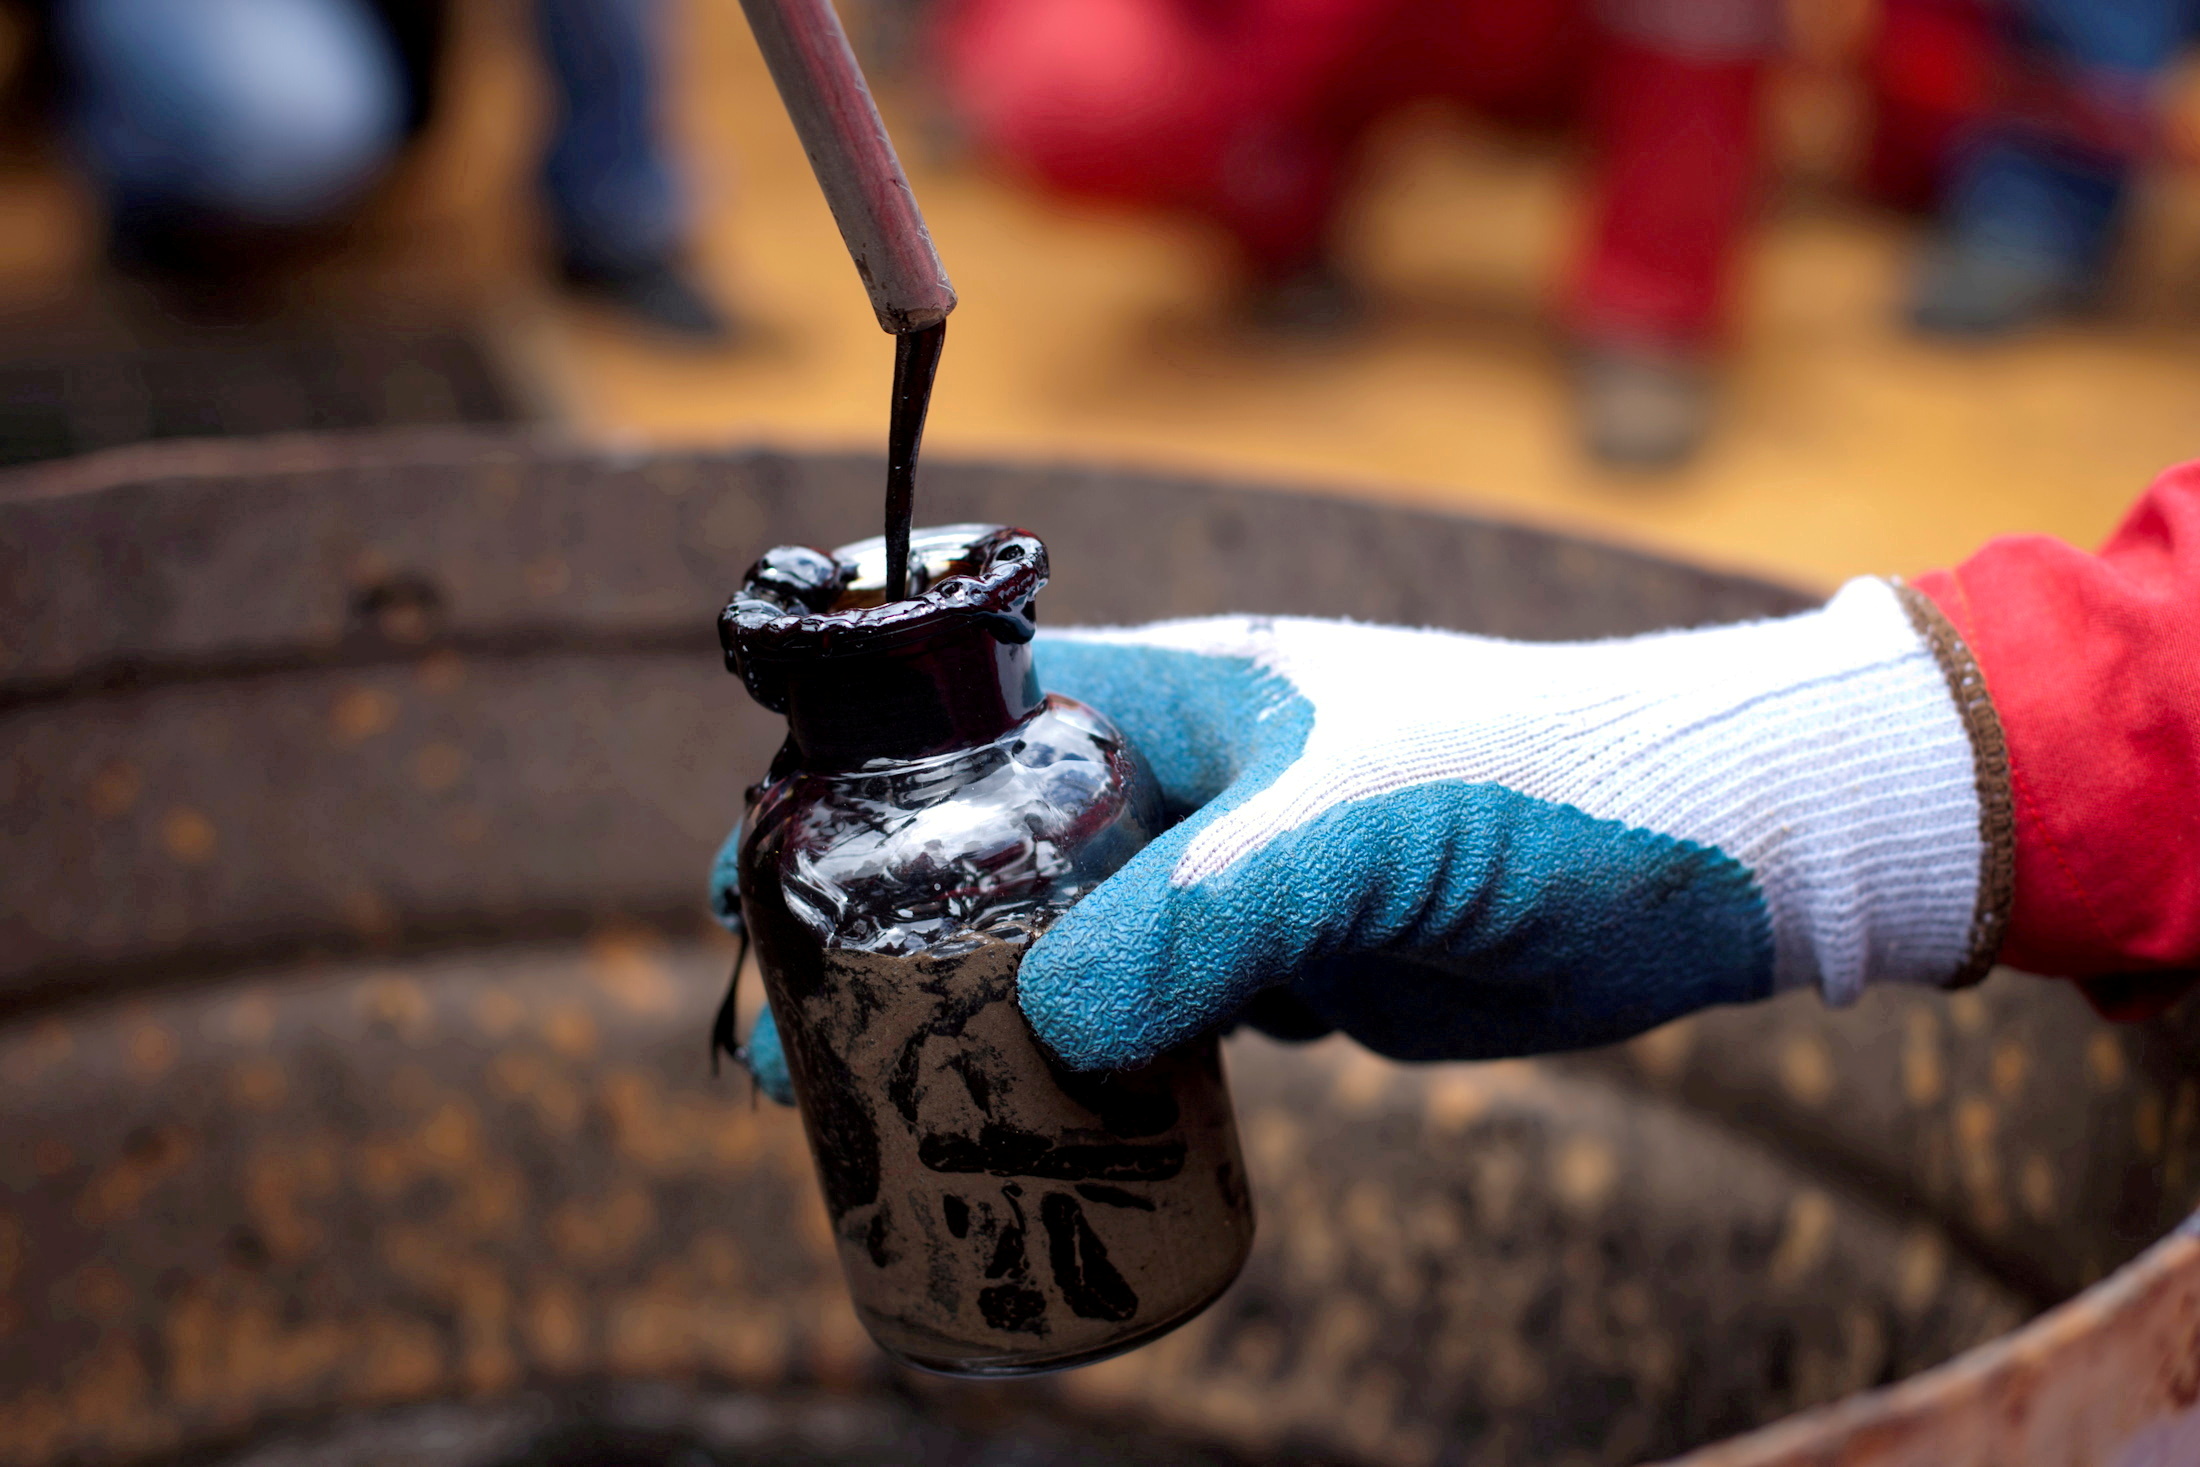 A worker collects a crude oil sample at an oil well operated by Venezuela's state oil company PDVSA in Morichal